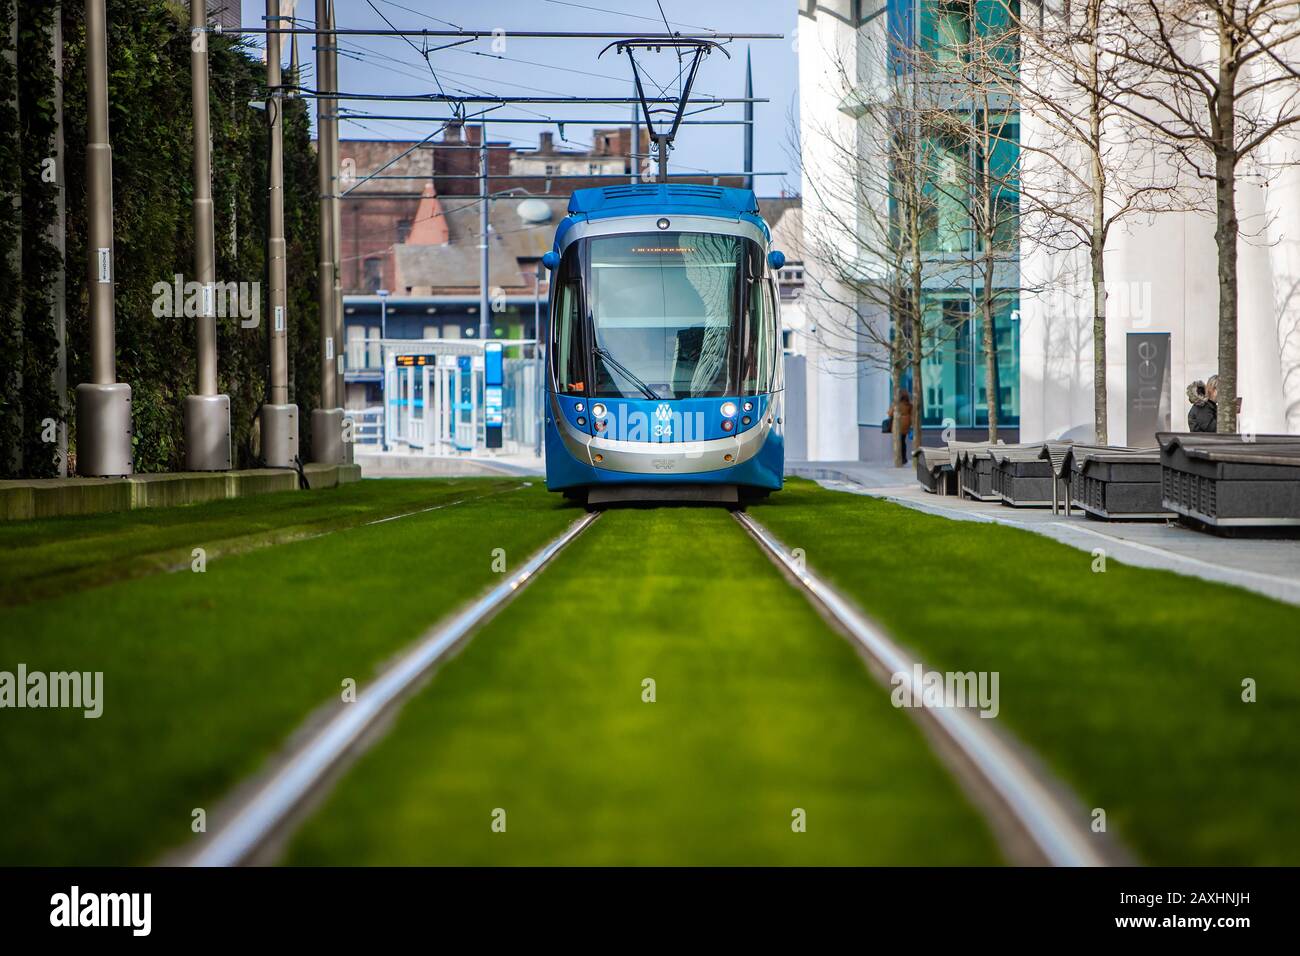 The Midland Metro continues to extend through the city of Birmingham, UK. Stock Photo